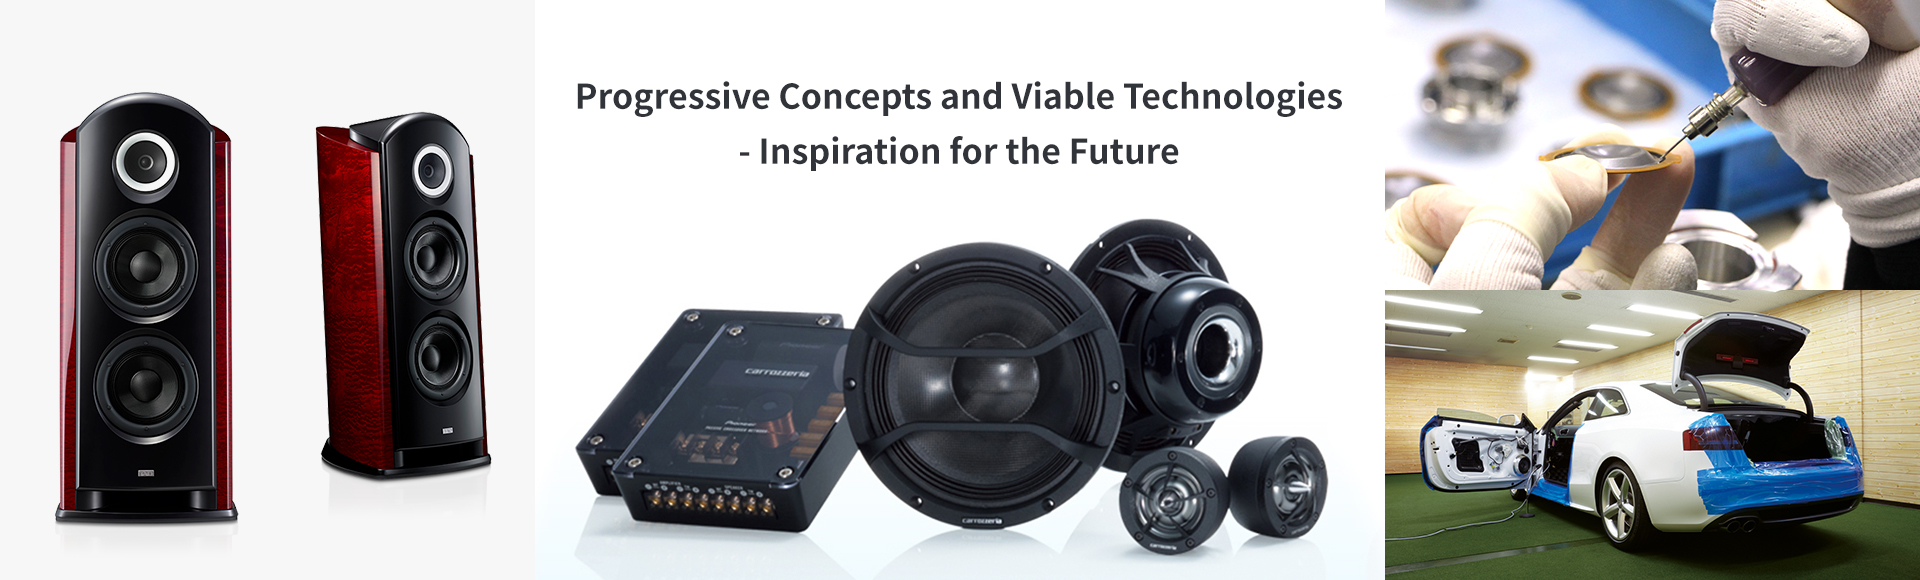 Progressive Concepts and Viable Technologies - Inspiration for the Future